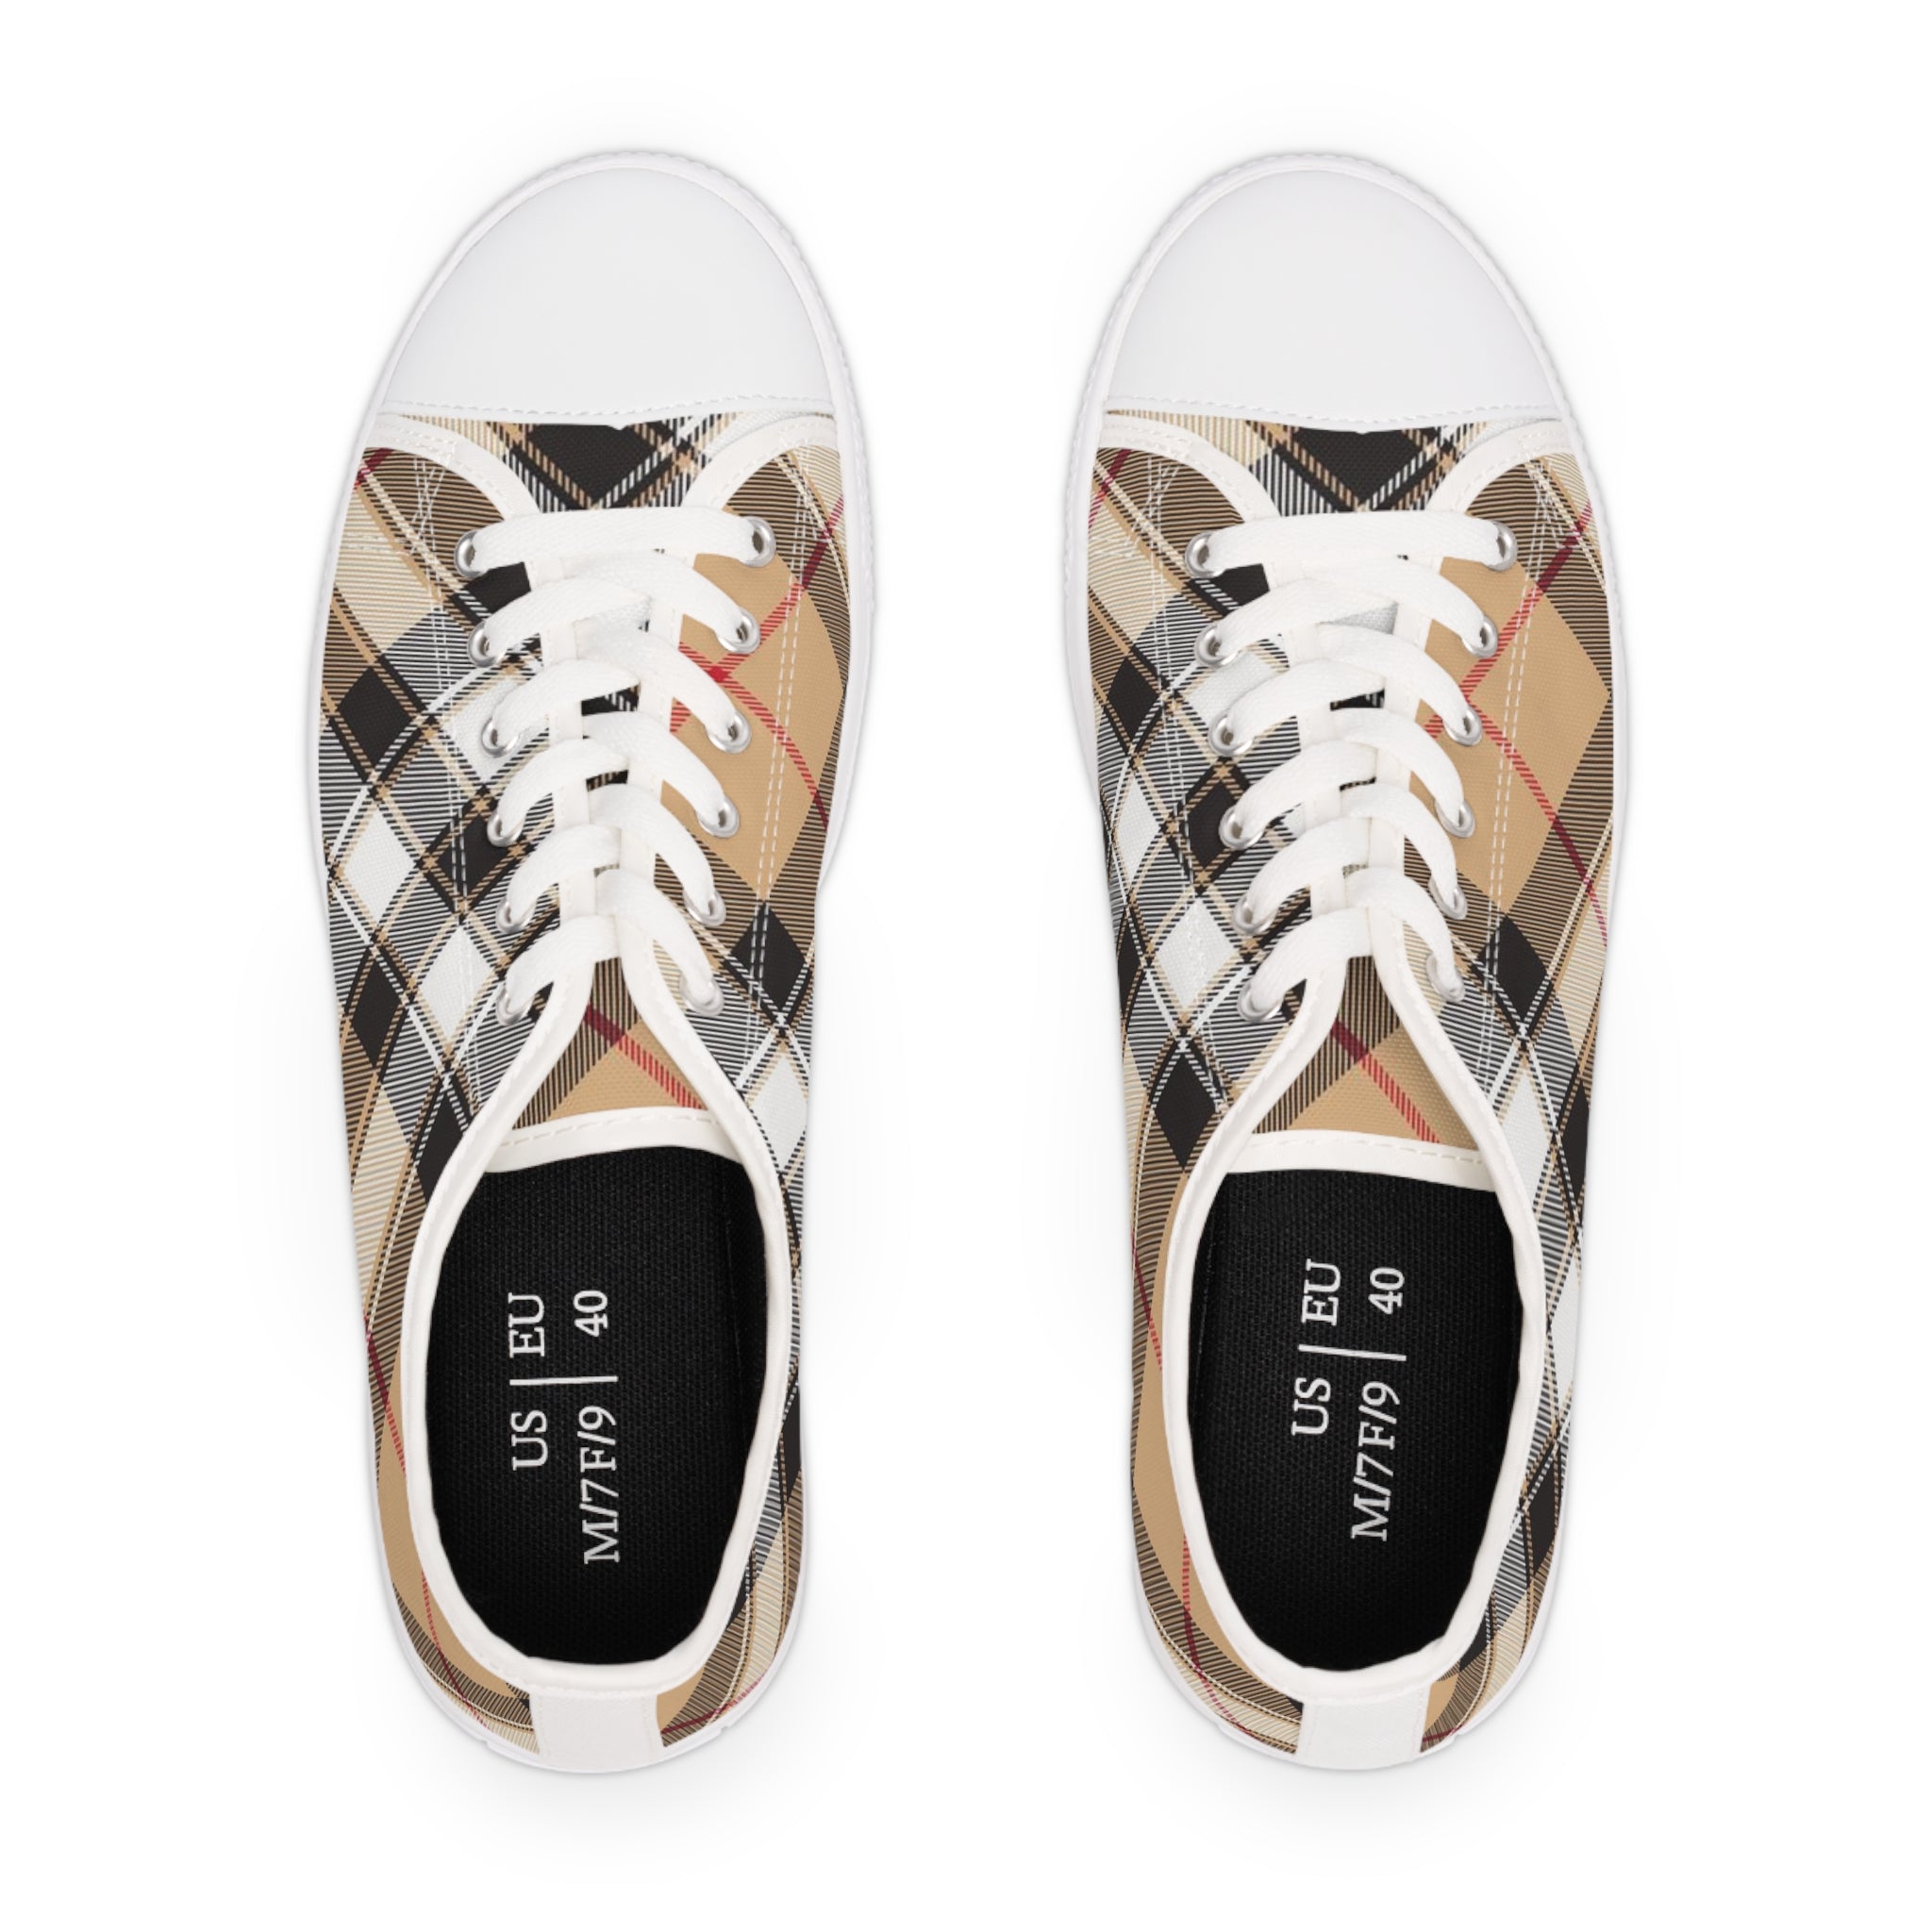 Groove Fashion Collection in Plaid (Red Stripe) Large Print Women's Low Top White Canvas Shoes